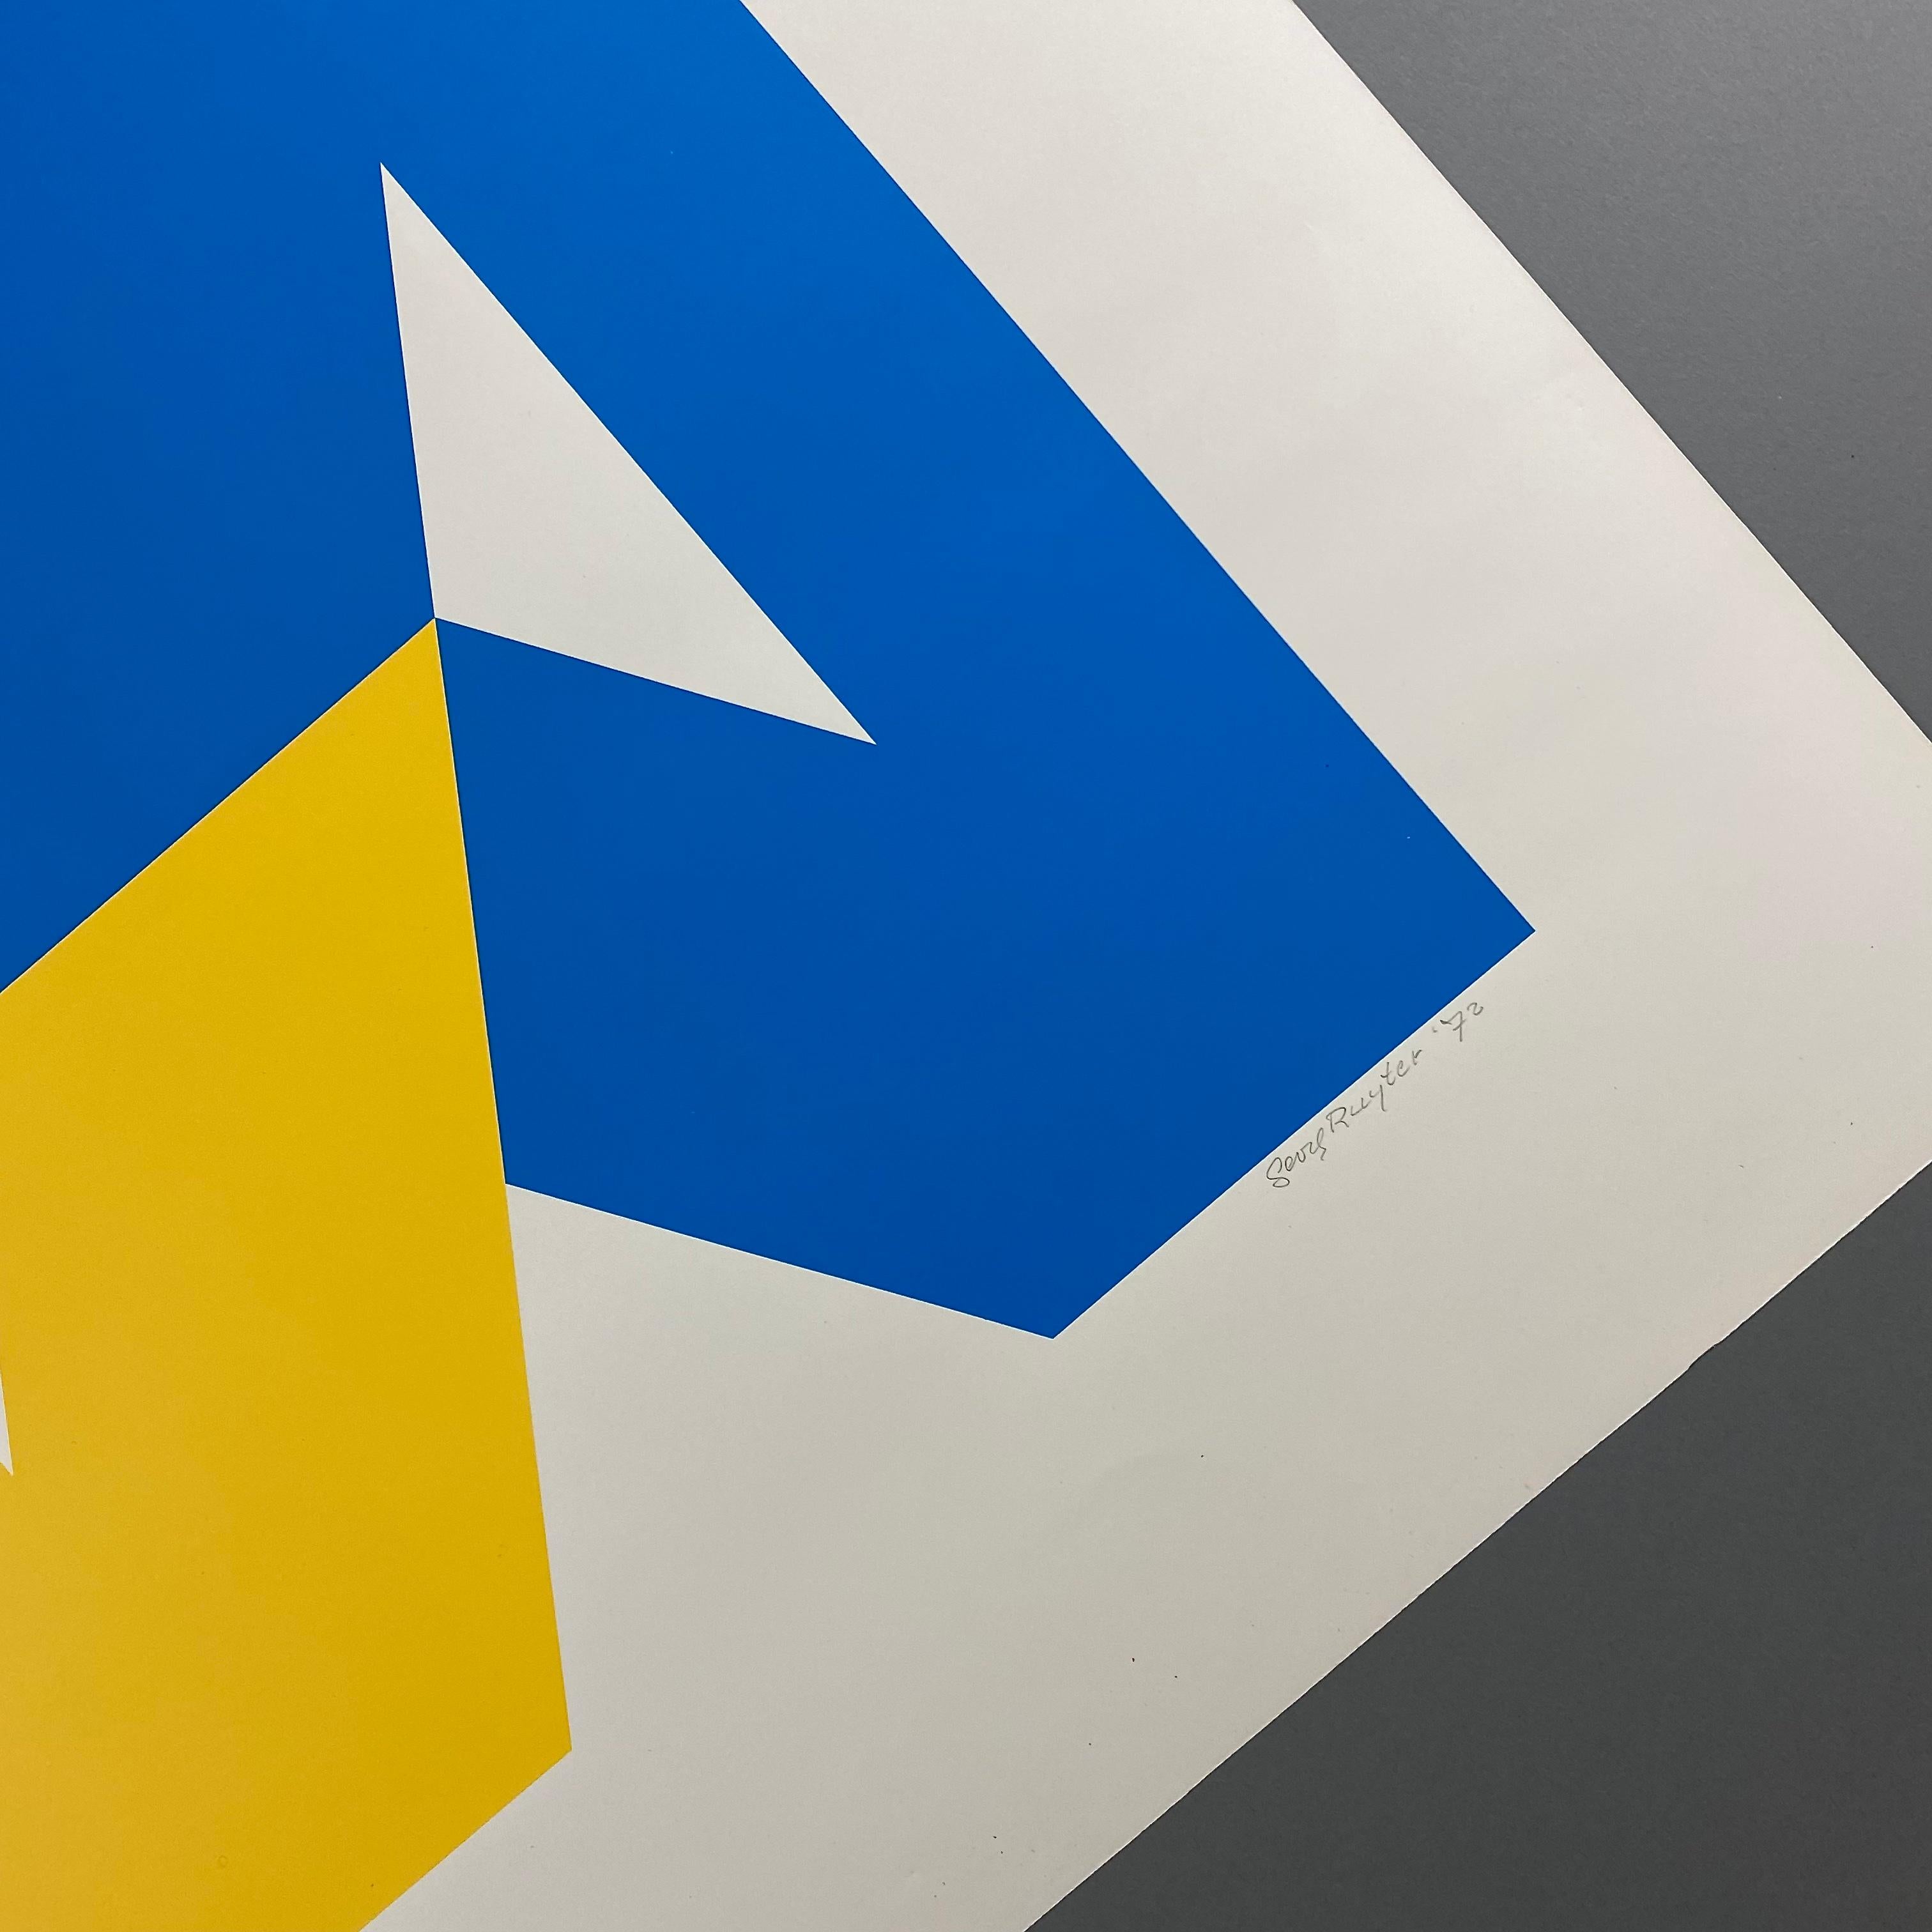 Late 20th Century Abstract Geometric Blue and Yellow 70s Limited Edition Silkscreen Print For Sale